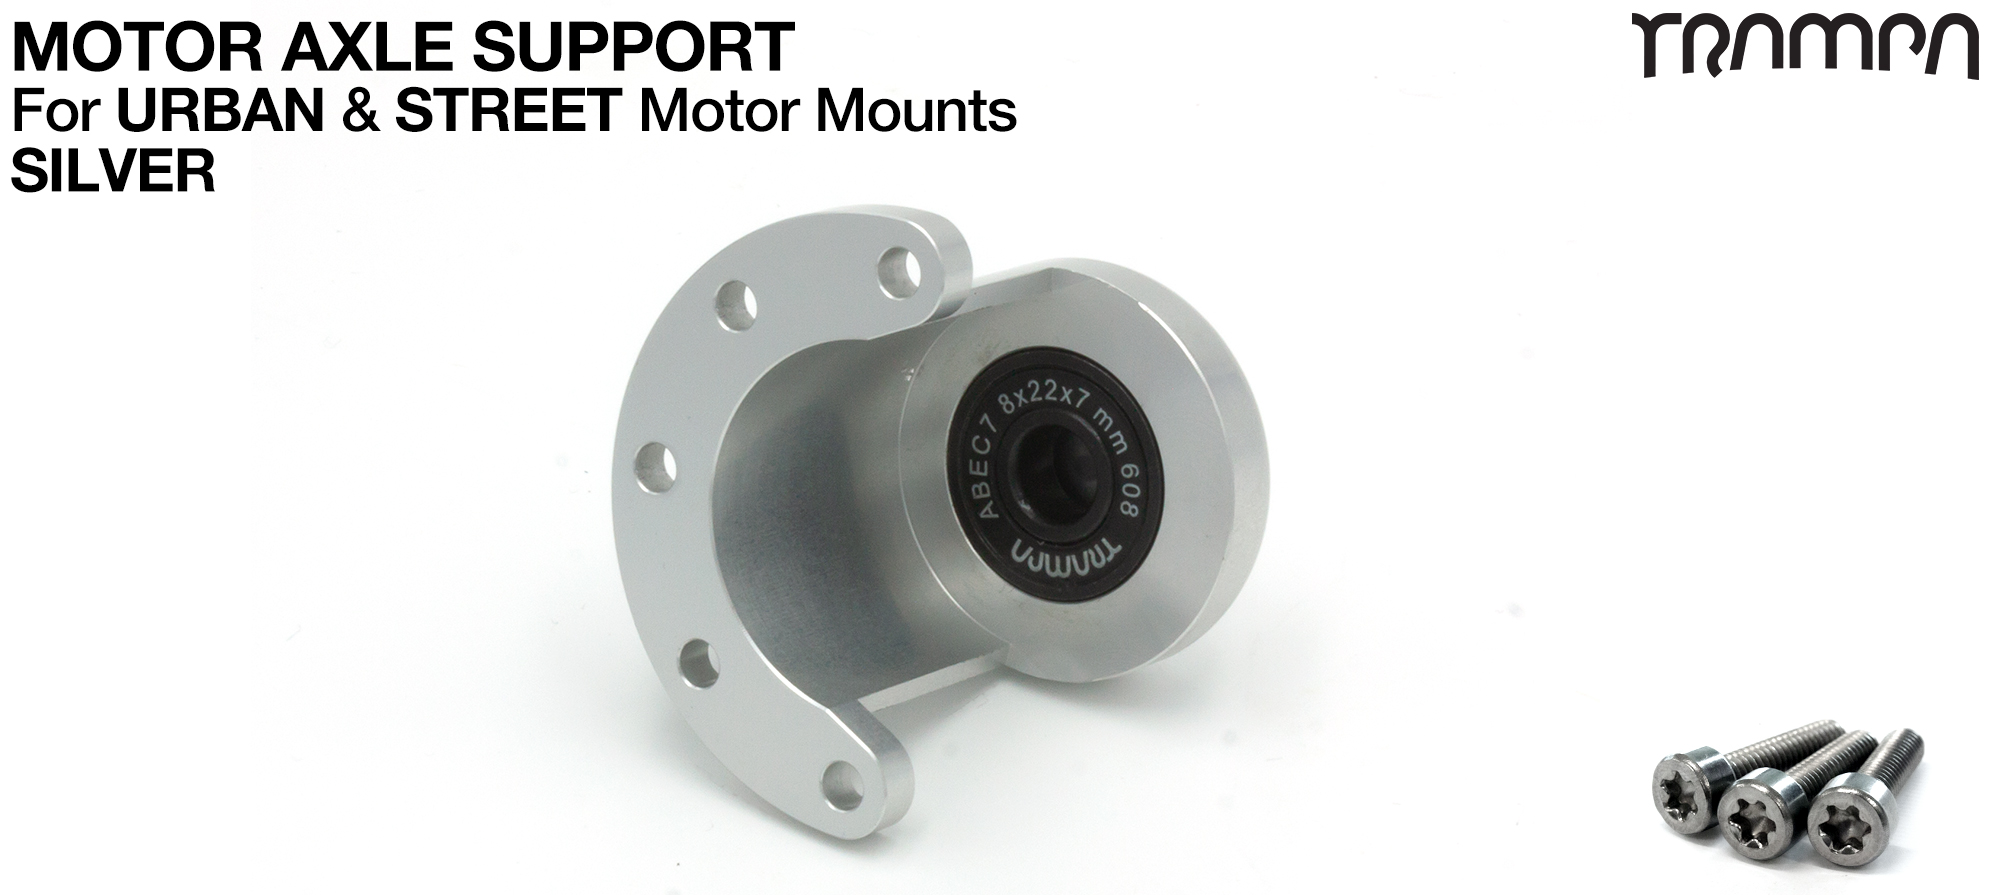 Universal Motor Axle Support Housing - SILVER 